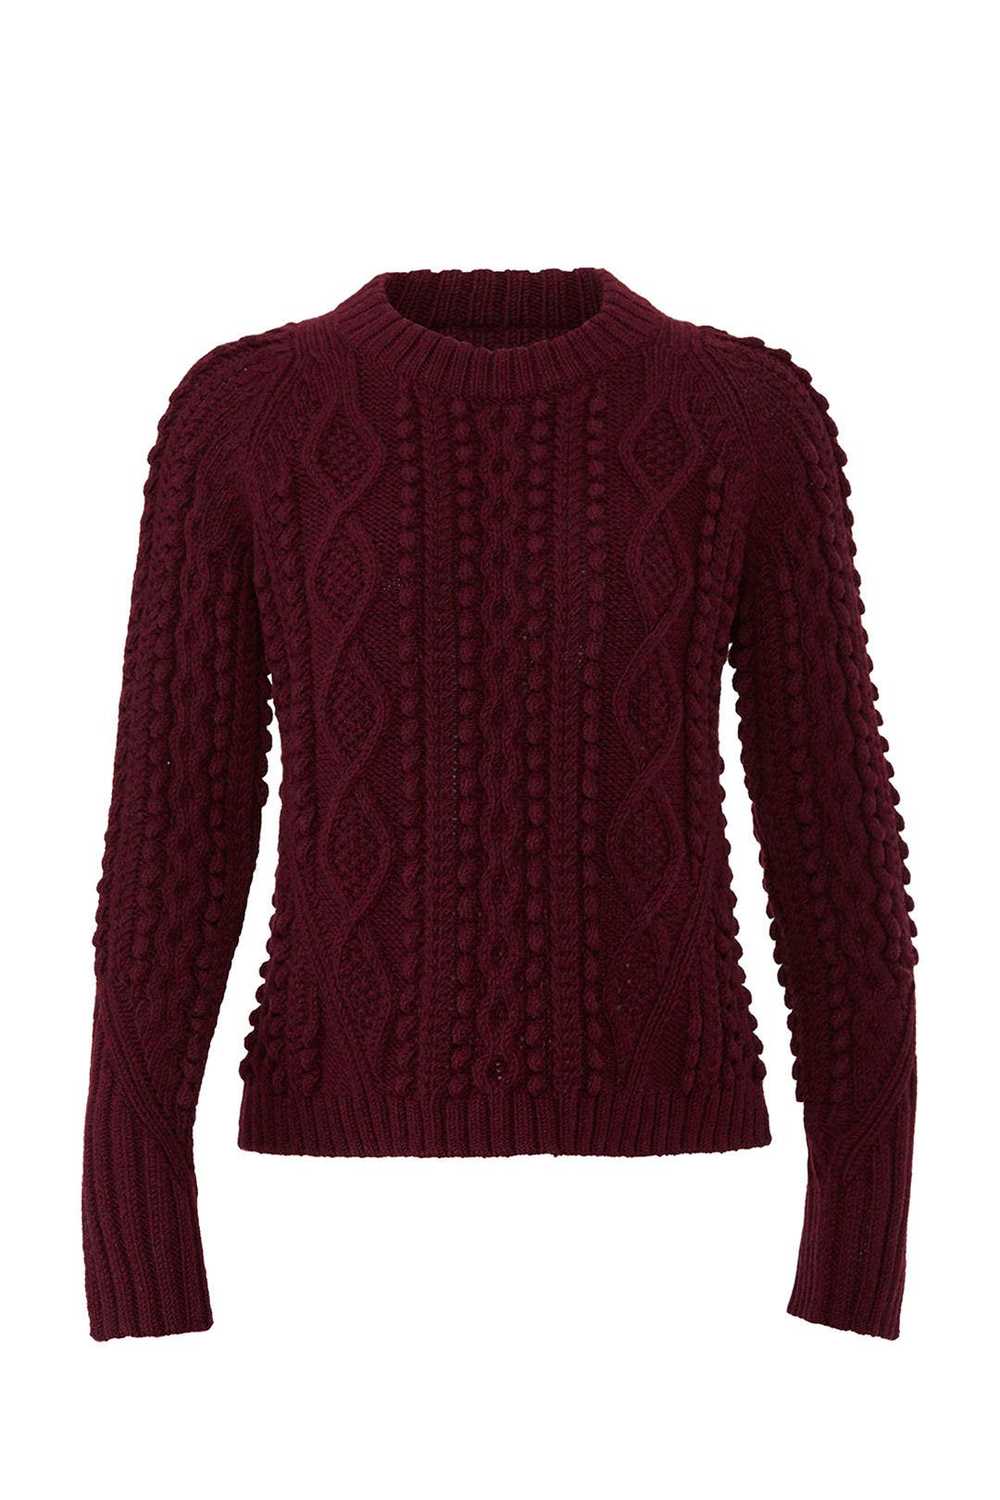 3.1 Phillip Lim Popcorn Cable Wool Pullover - image 4